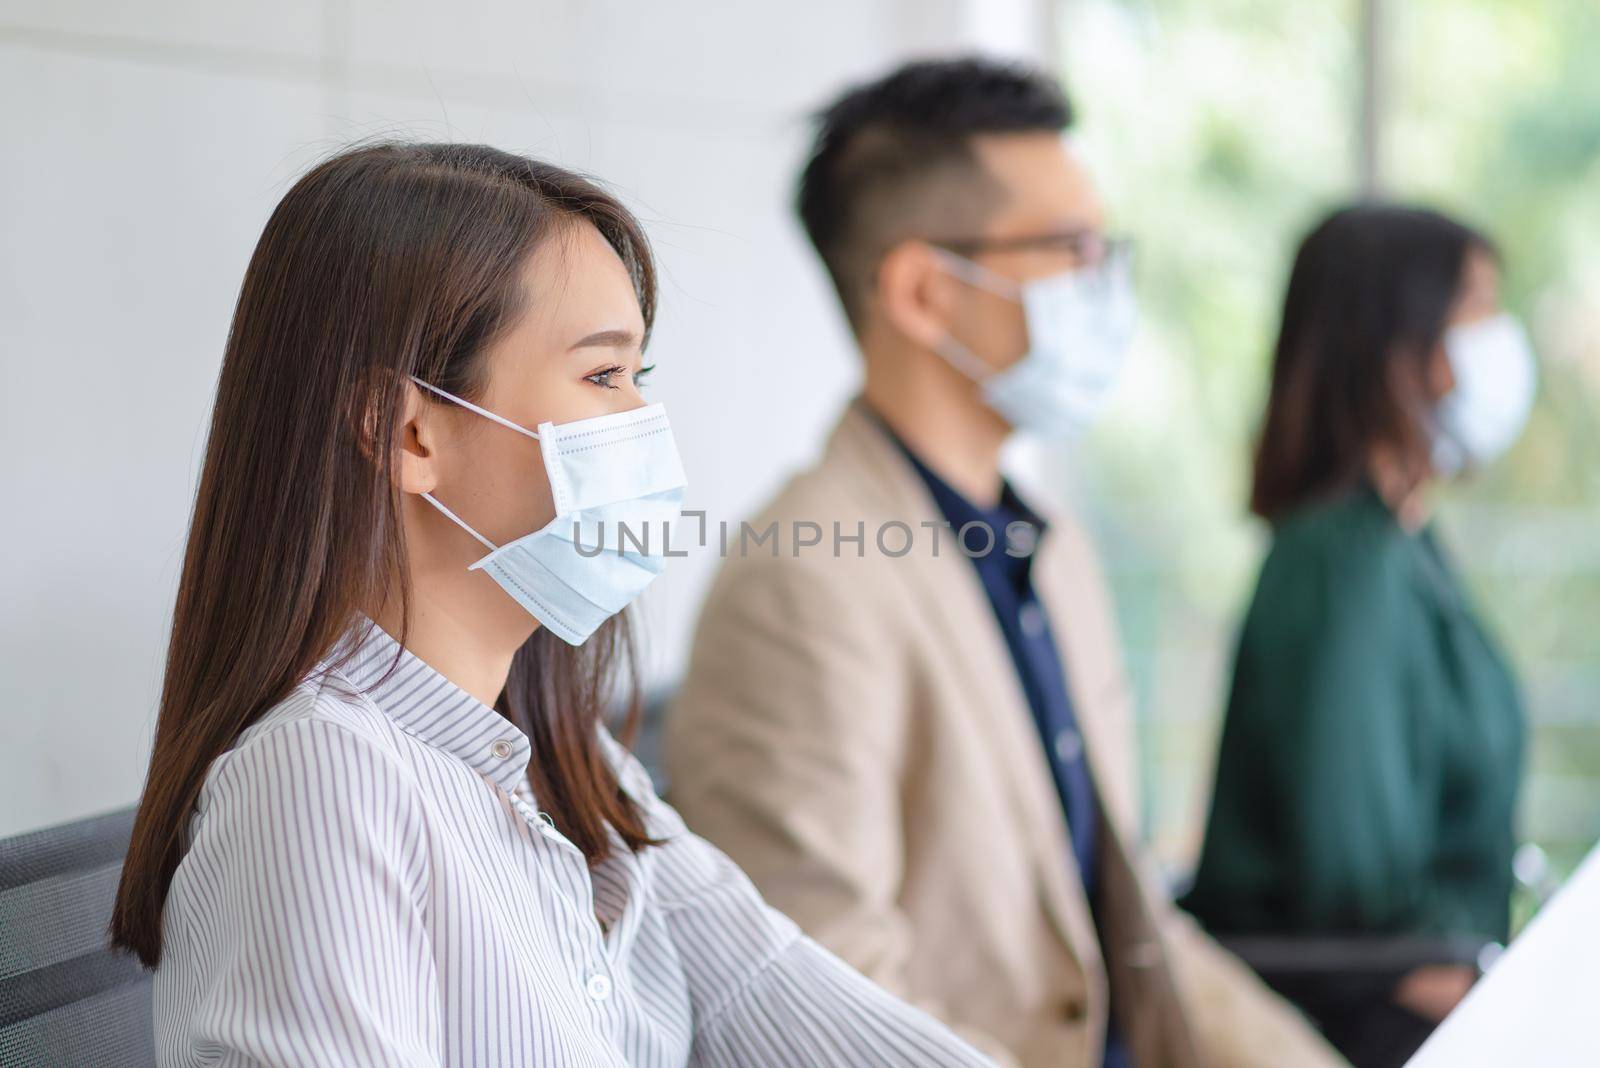 Business employees wearing mask during work in office to keep hygiene follow company policy by Nuamfolio